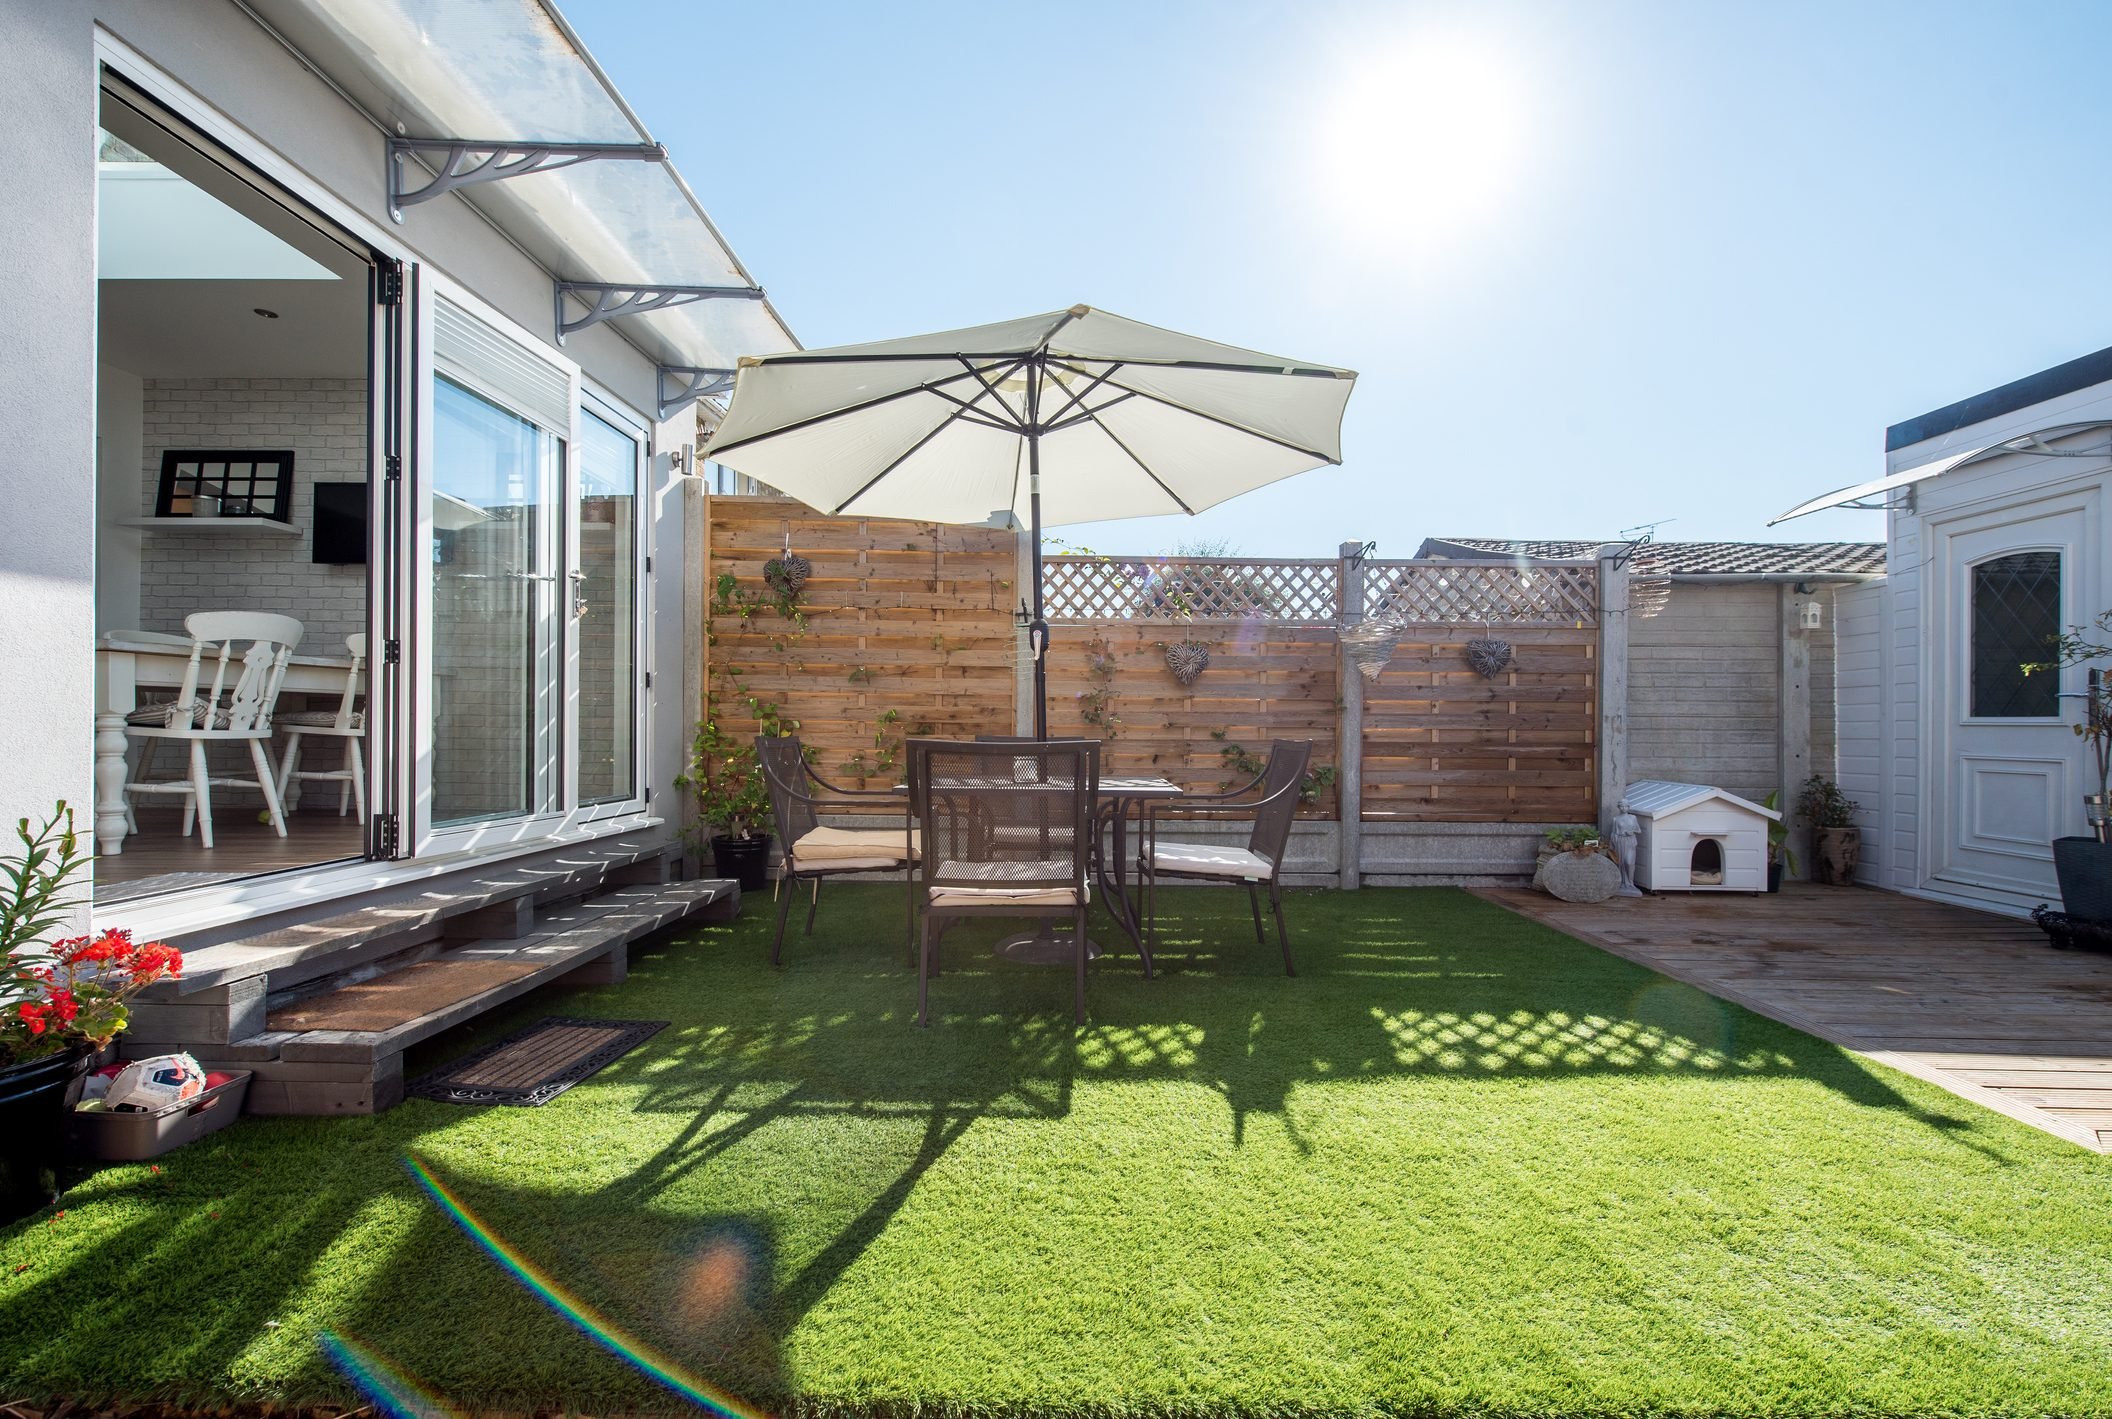 Do You Have to Clean Artificial Grass?